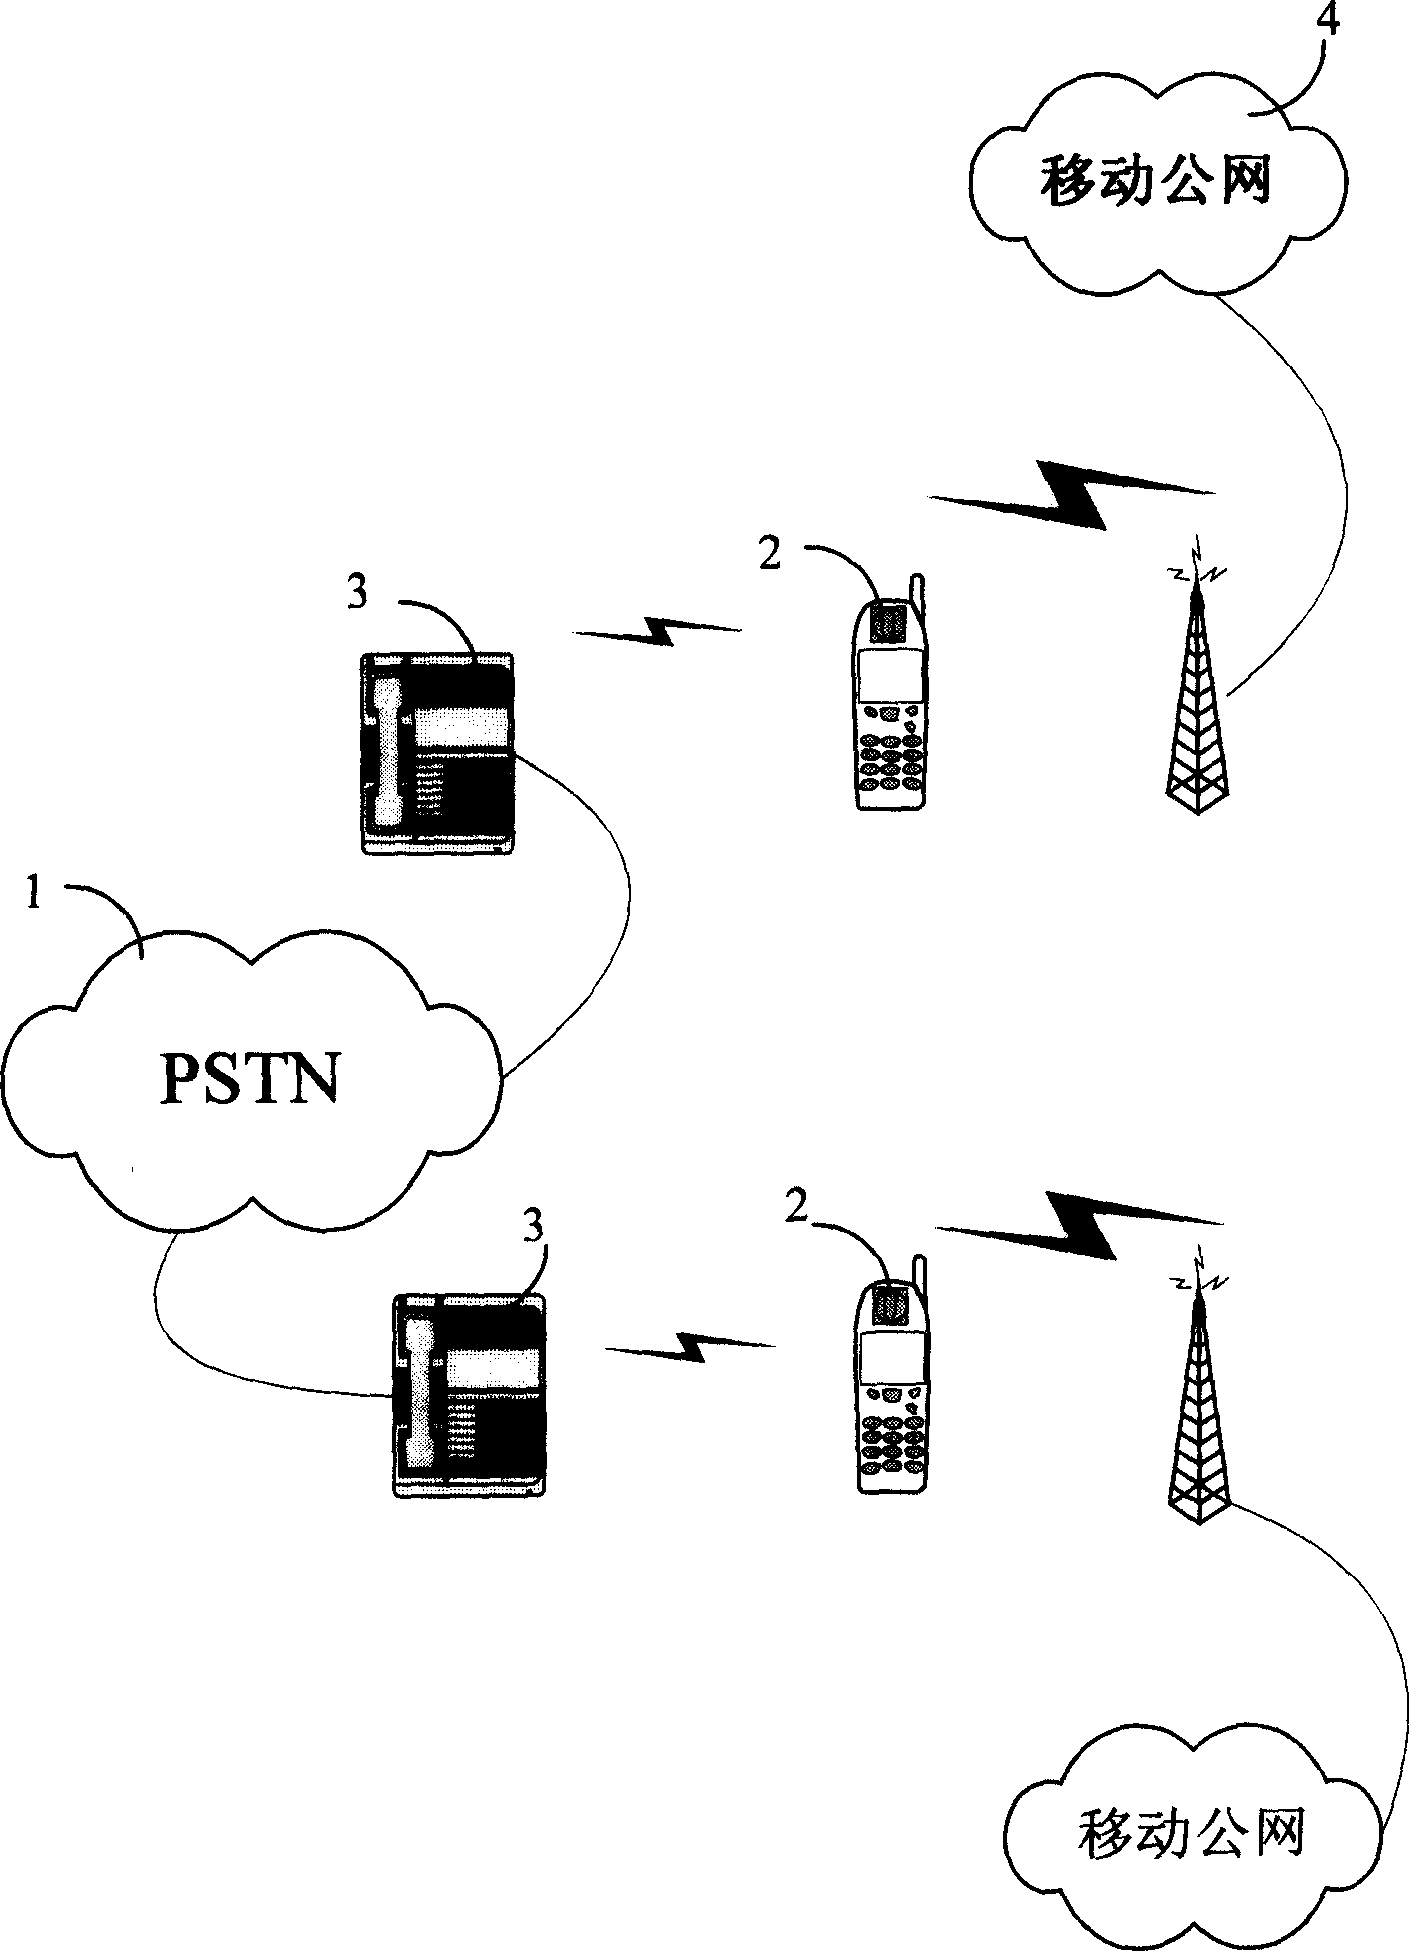 A method and system for implementing short distance wireless communication in public switched telephone network